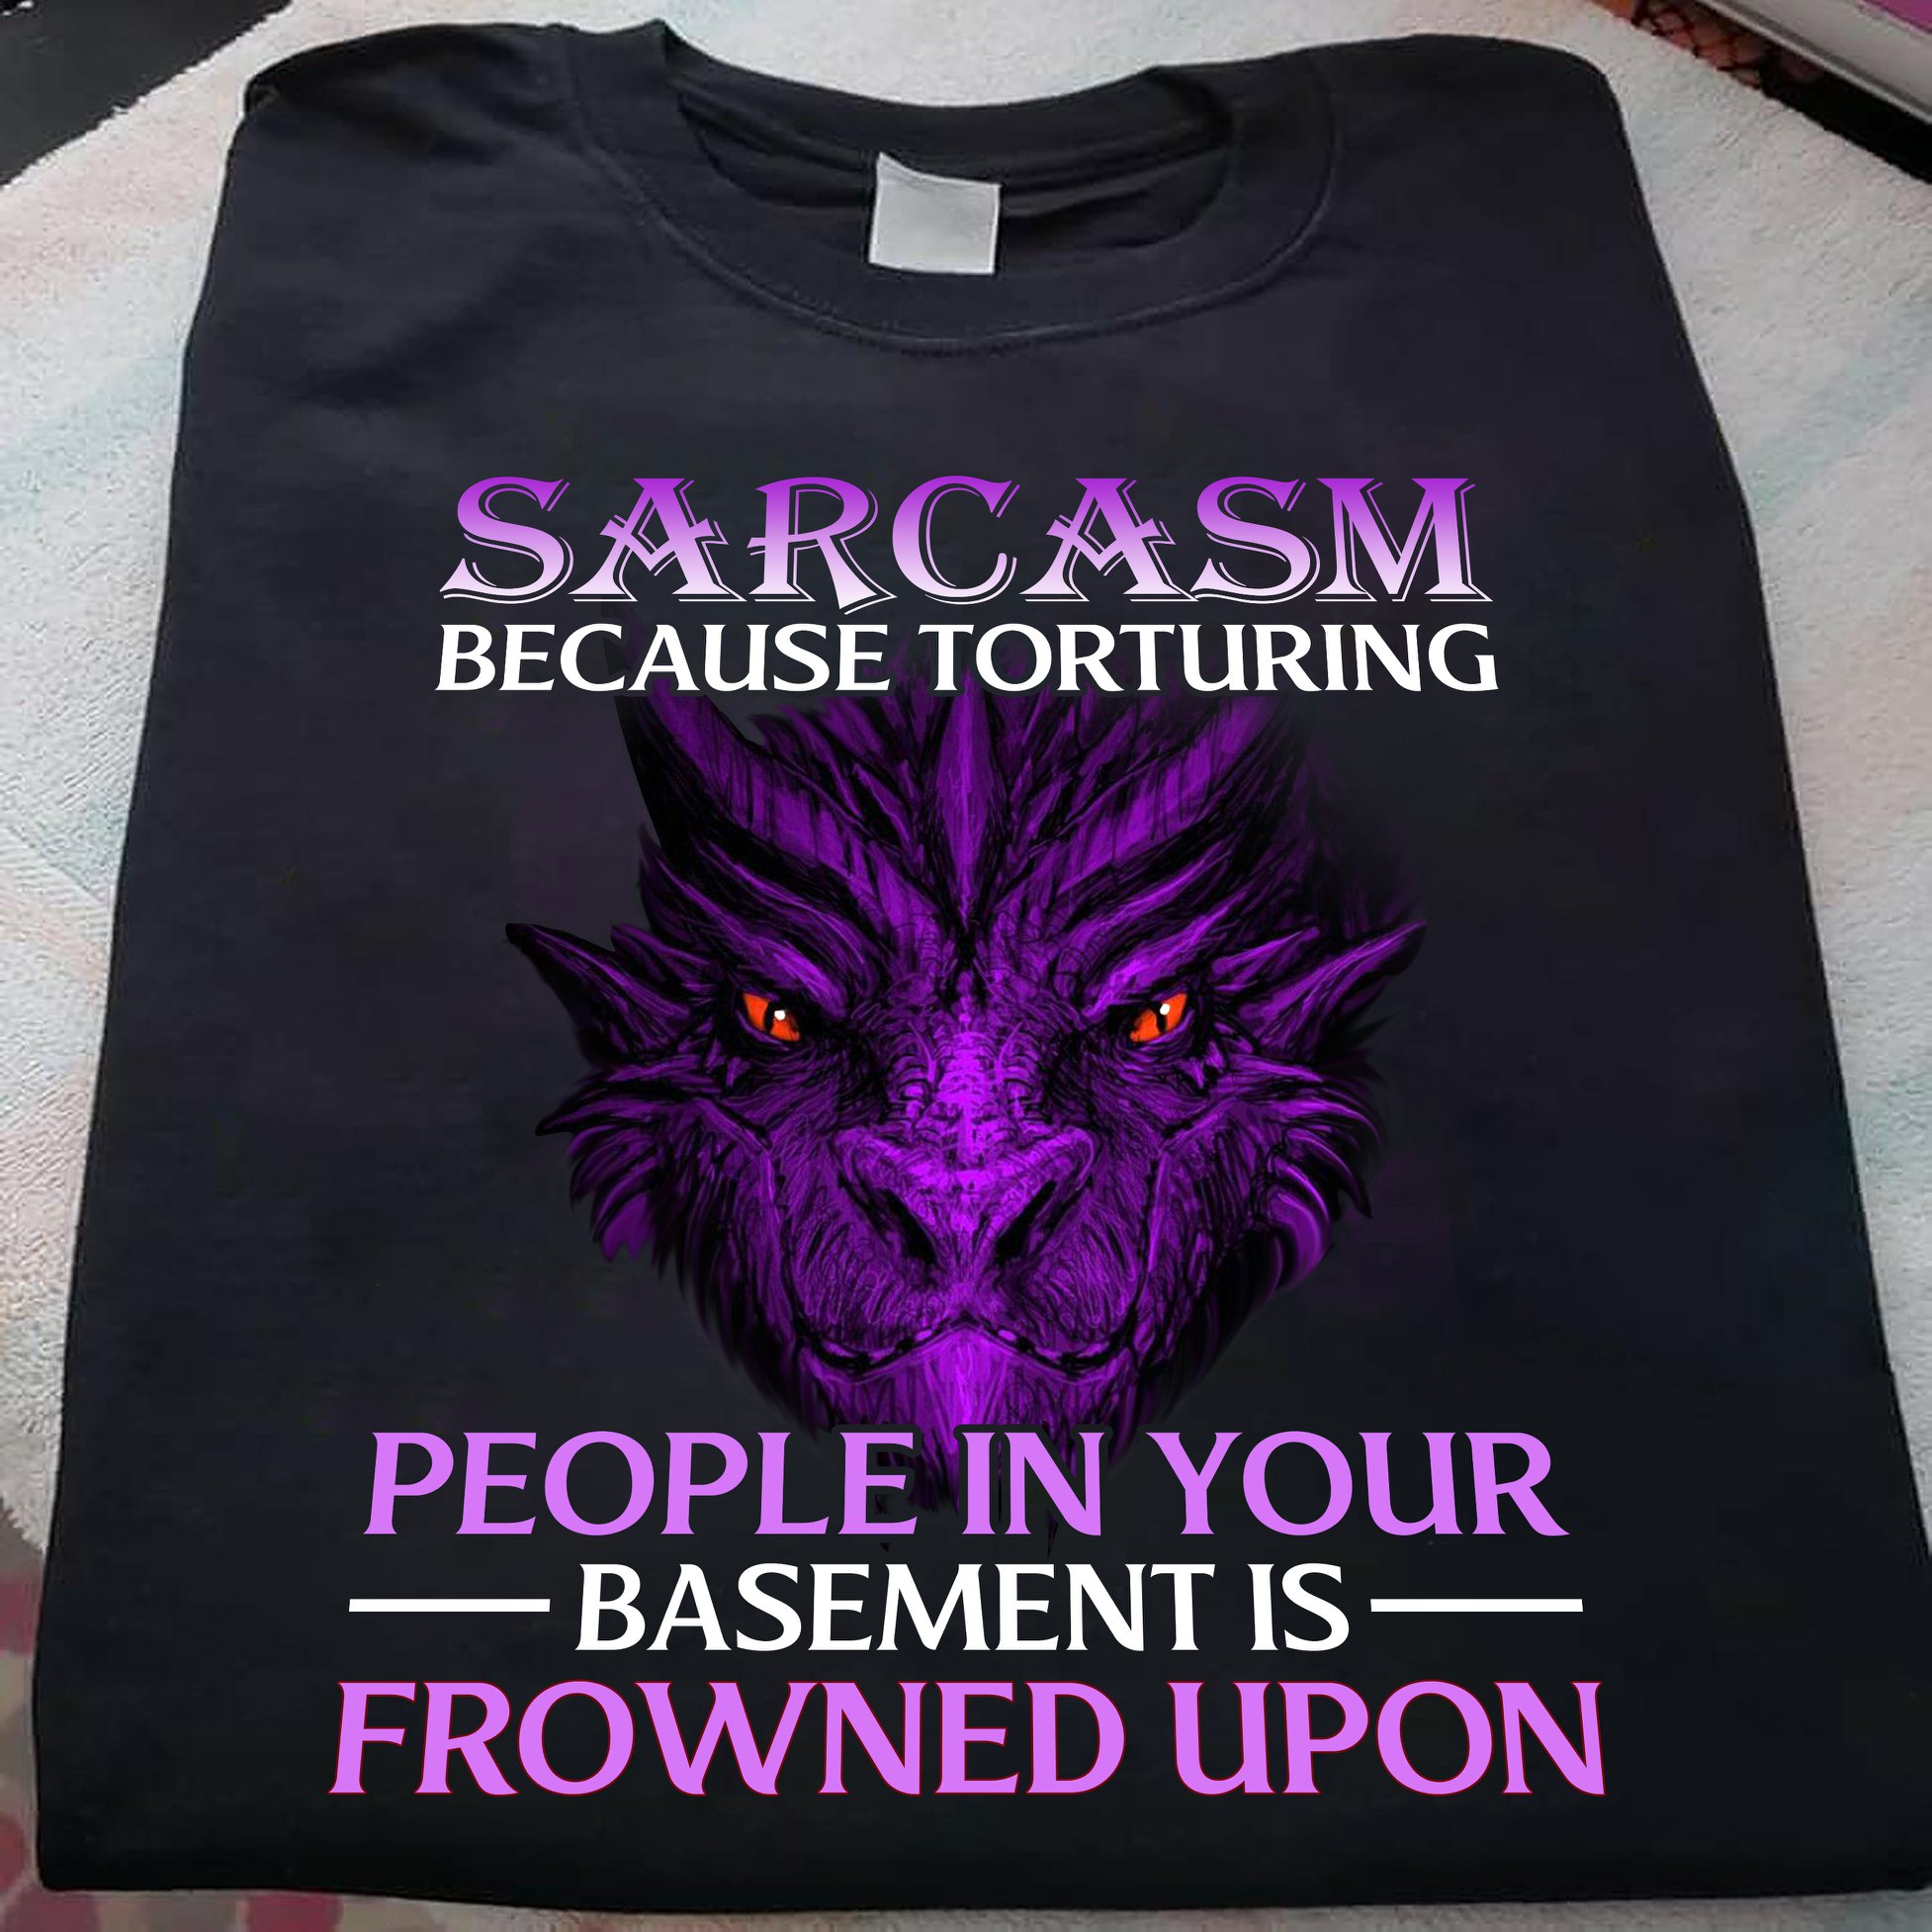 Sarcasm because torturing people in your basement is frowned upon - Dragon lover